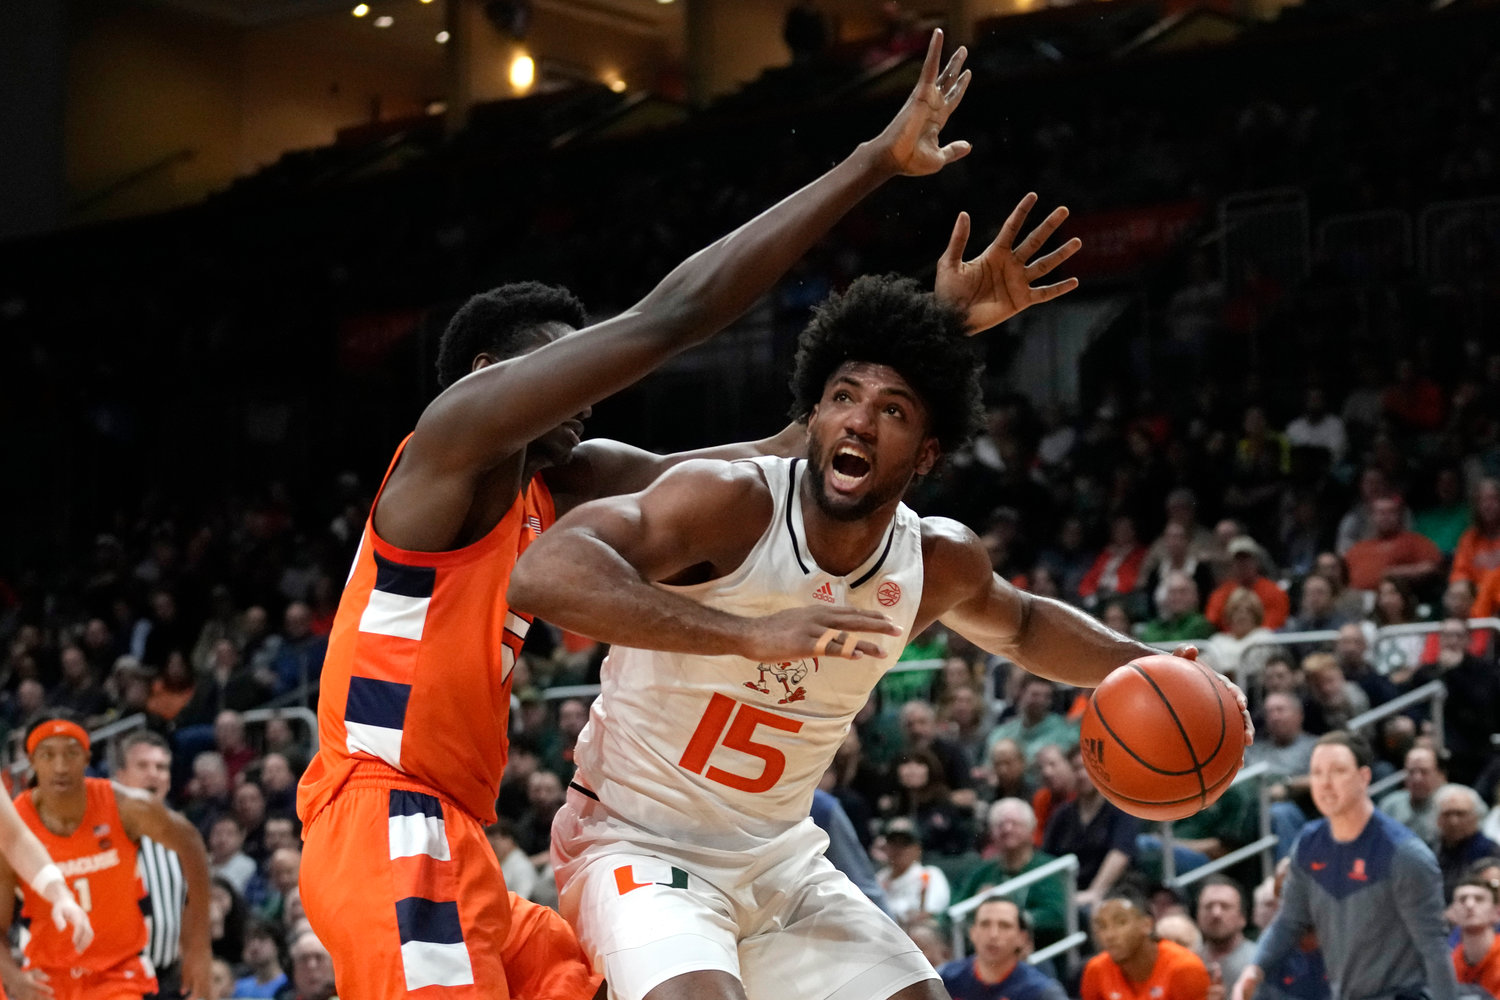 Miami forward Norchad Omier (15) drives to the basket as Syracuse center Mounir Hima defends during the first half of Monday night's game in Coral Gables, Fla. The Orange lost 82-78.